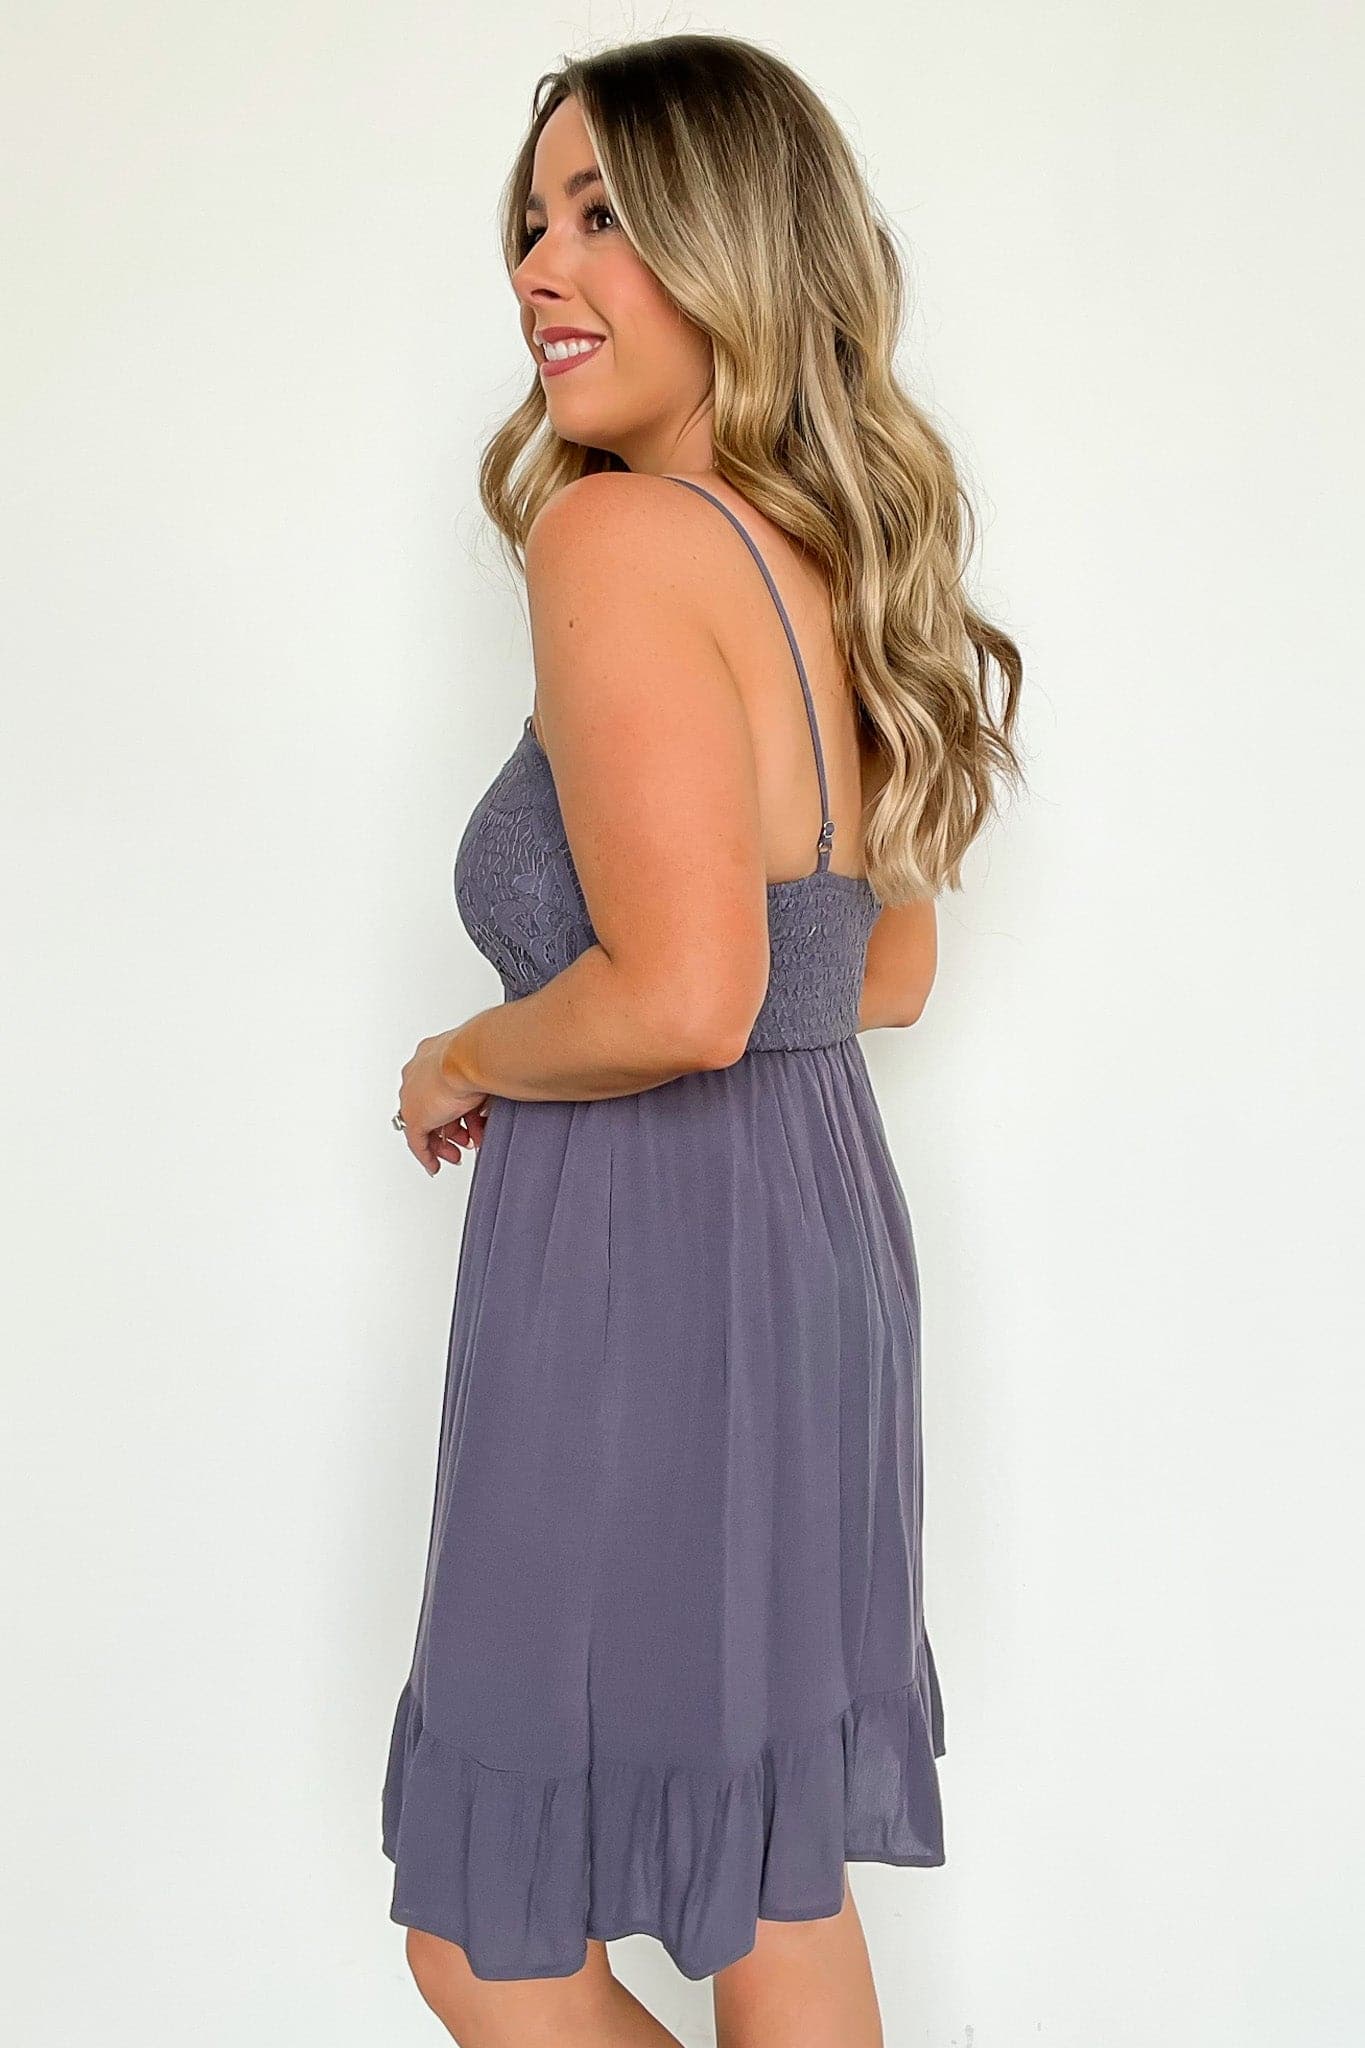  Easy Attention Lace Bodice Ruffle Dress - FINAL SALE - Madison and Mallory